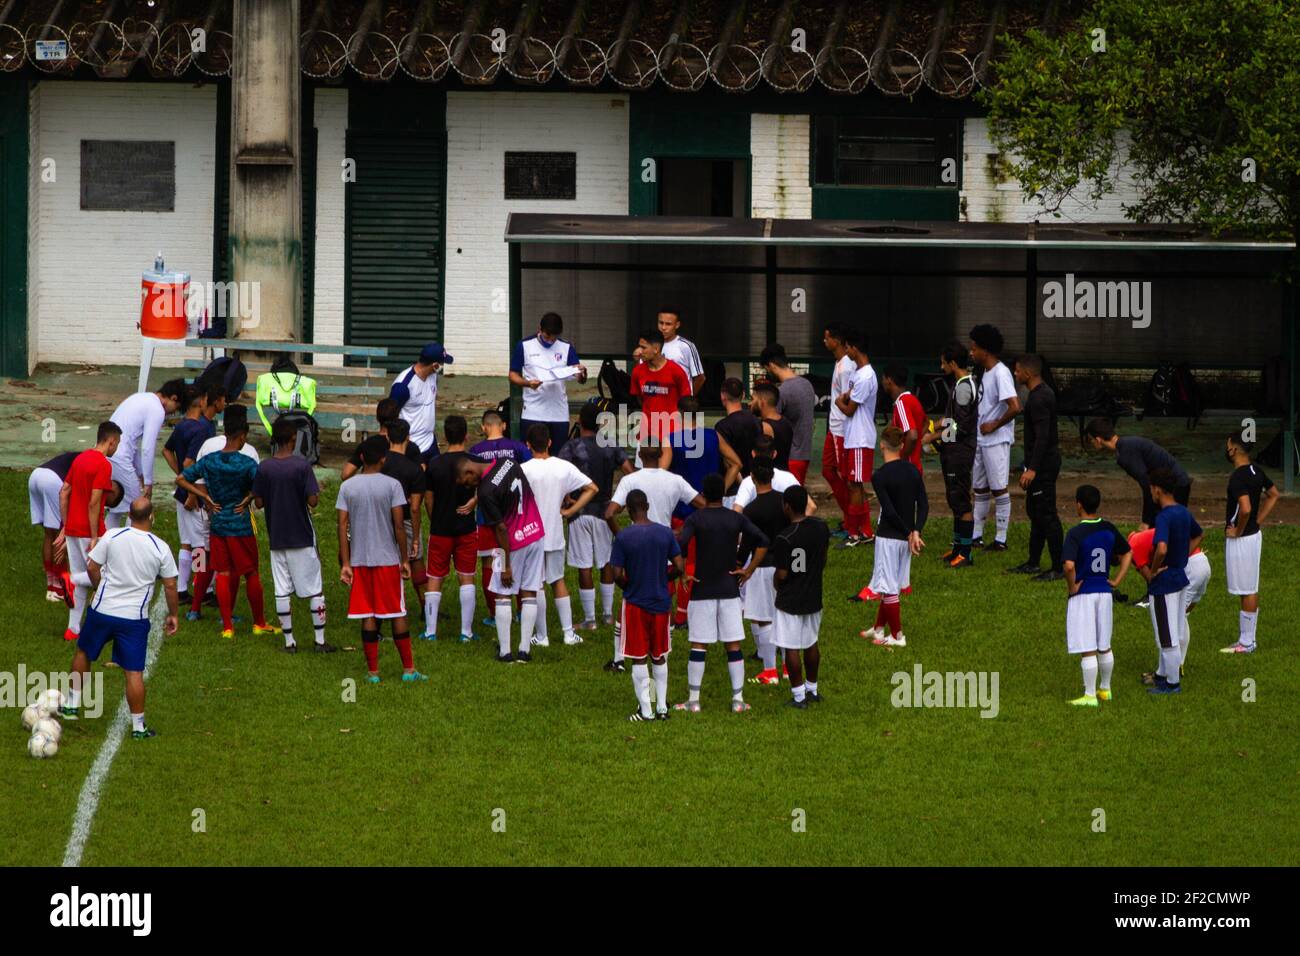 Betim, Brazil. 11th Mar, 2021. The Betim Futebol team is making a sieve for the U20 category in the city of Betim/MG from March 10 to 12. All health care and protocols are being followed. Credit: Luciano Mariano/FotoArena/Alamy Live News Stock Photo